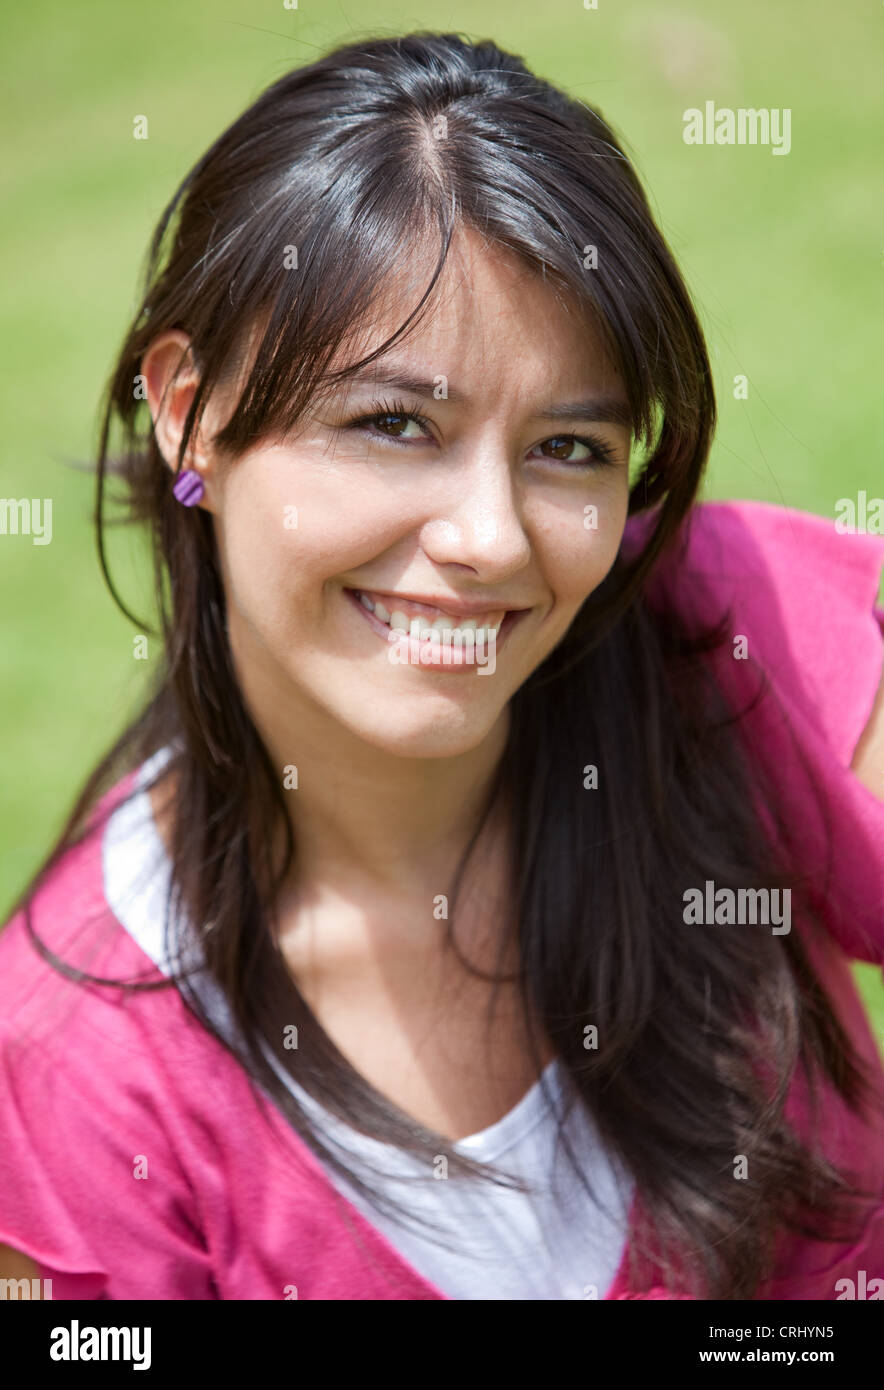 beautiful casual woman portrait smiling outdoors Stock Photo